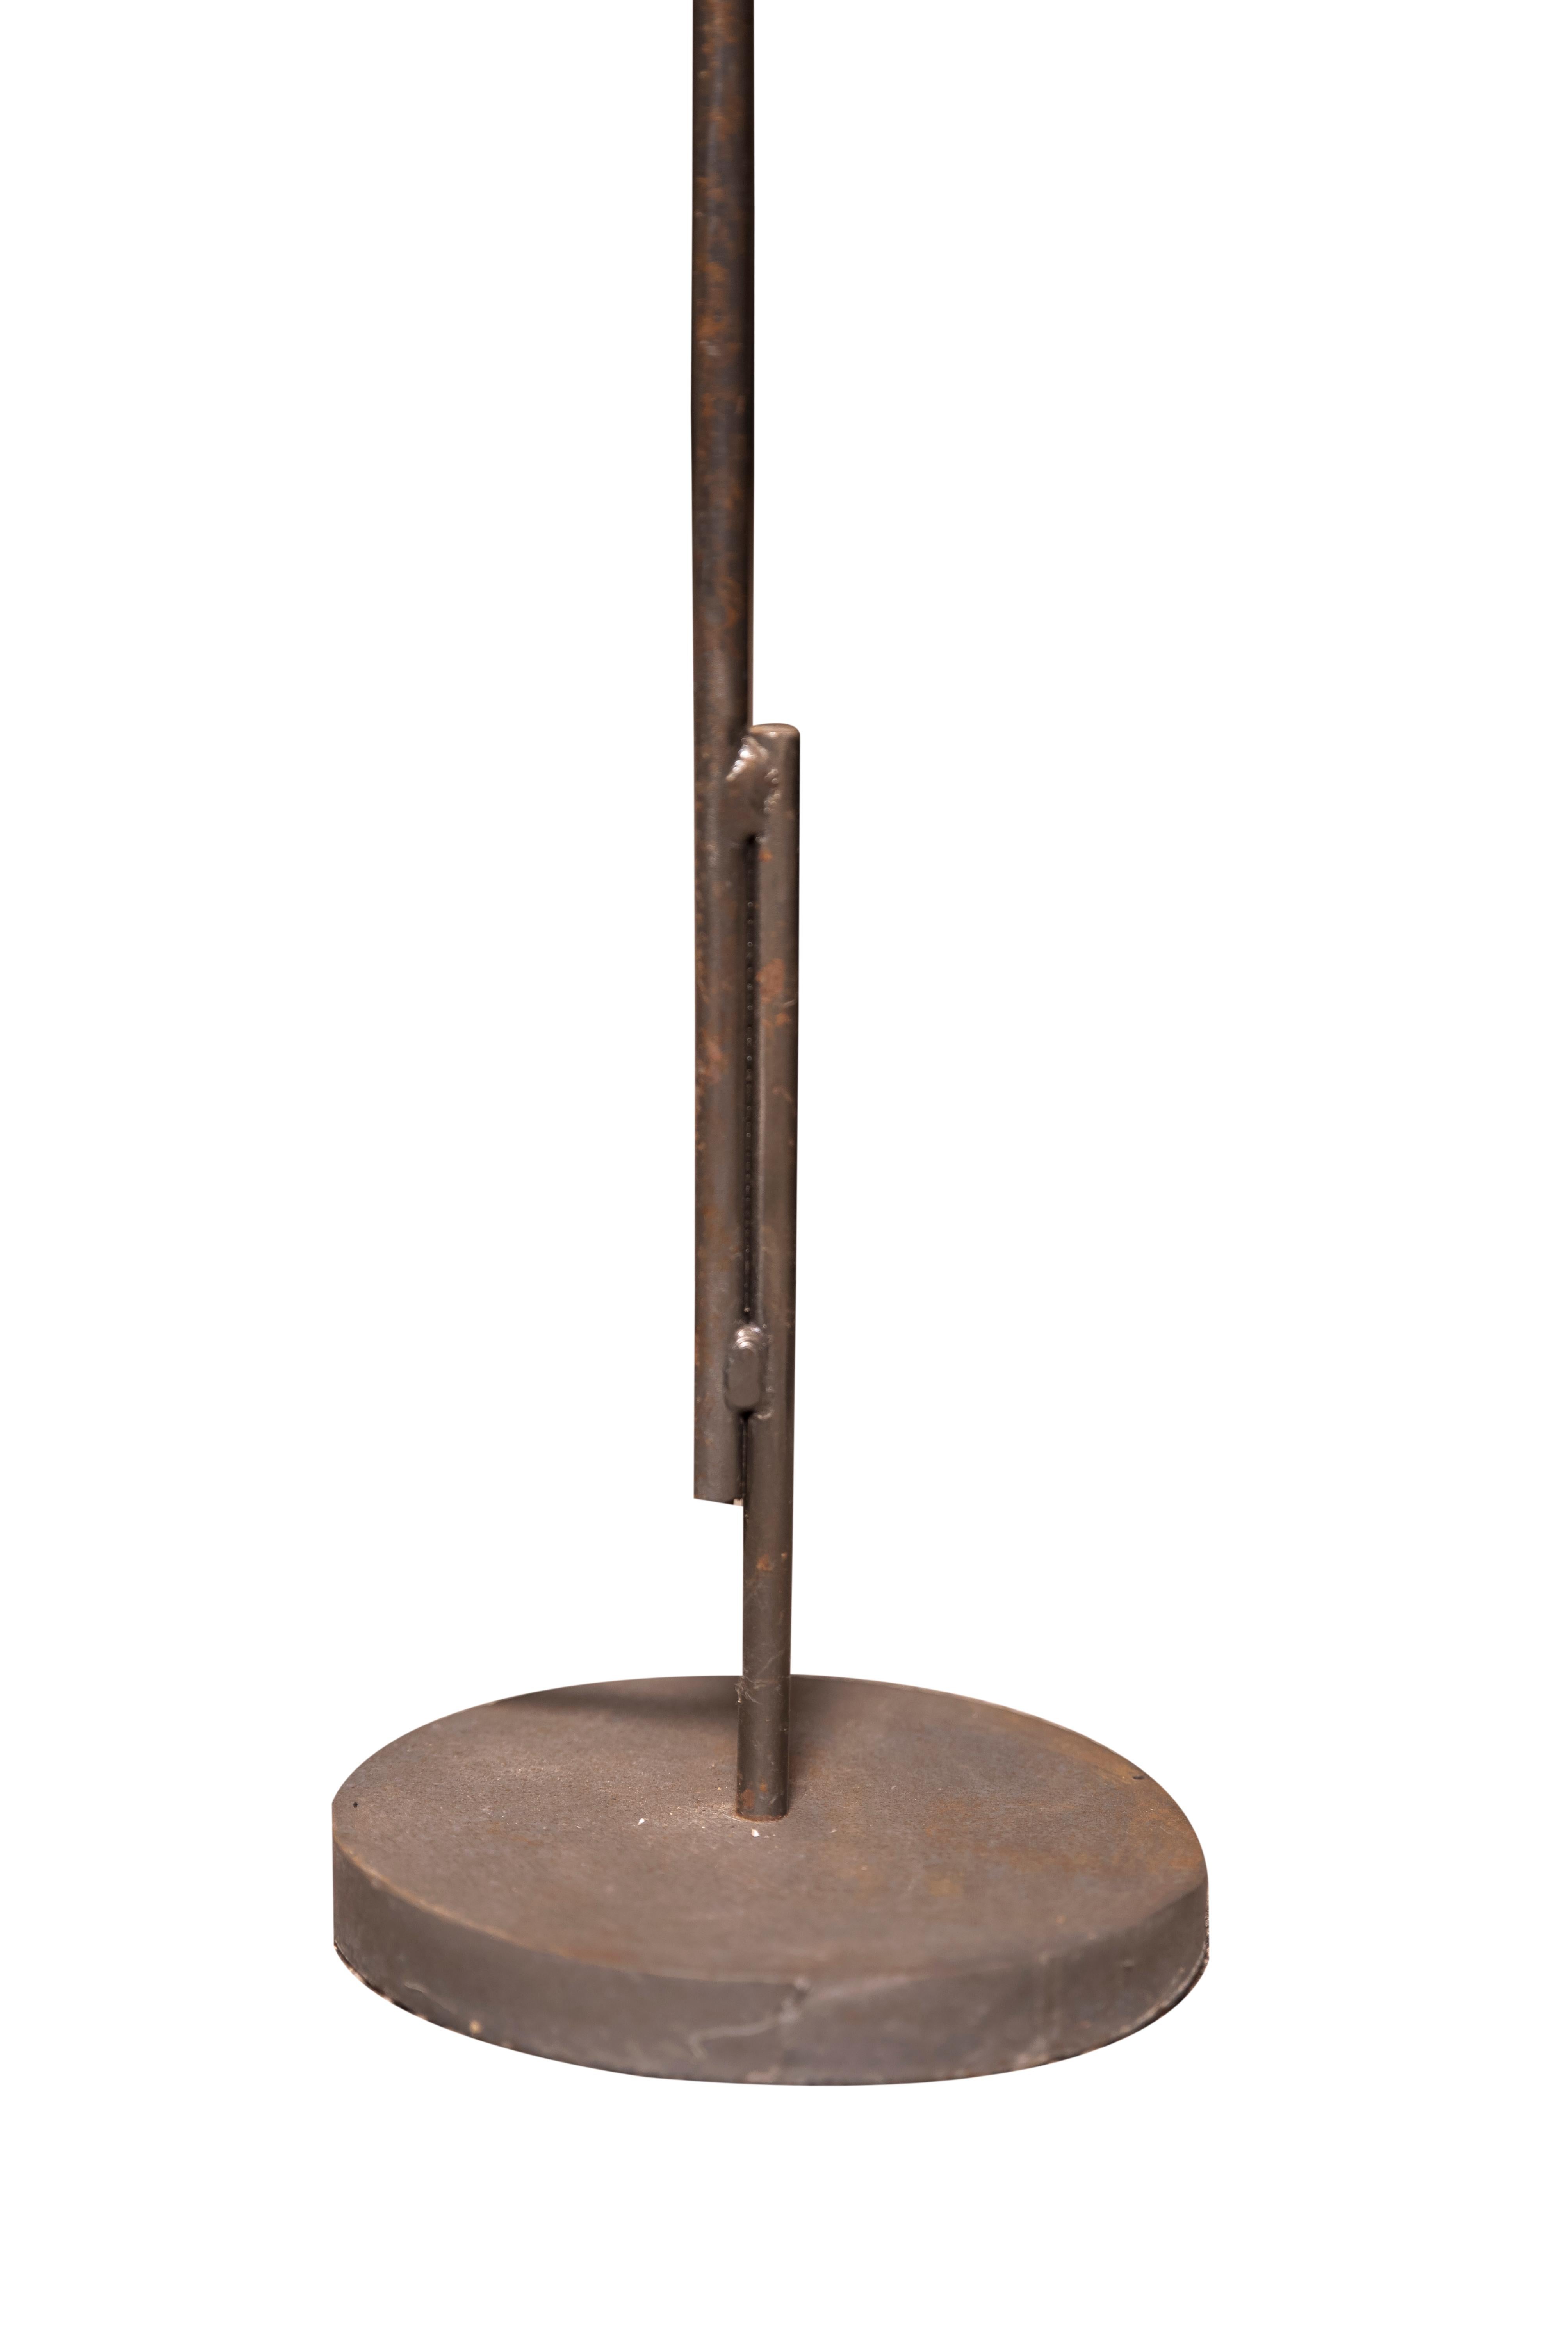 20th century metal floor lamp attributed to Franz West. The circular shade with black floral pattern on green groung above a plain round stem.
The two part shaft soldered near the circular base and with tall cilindrical shade is same as the West´s